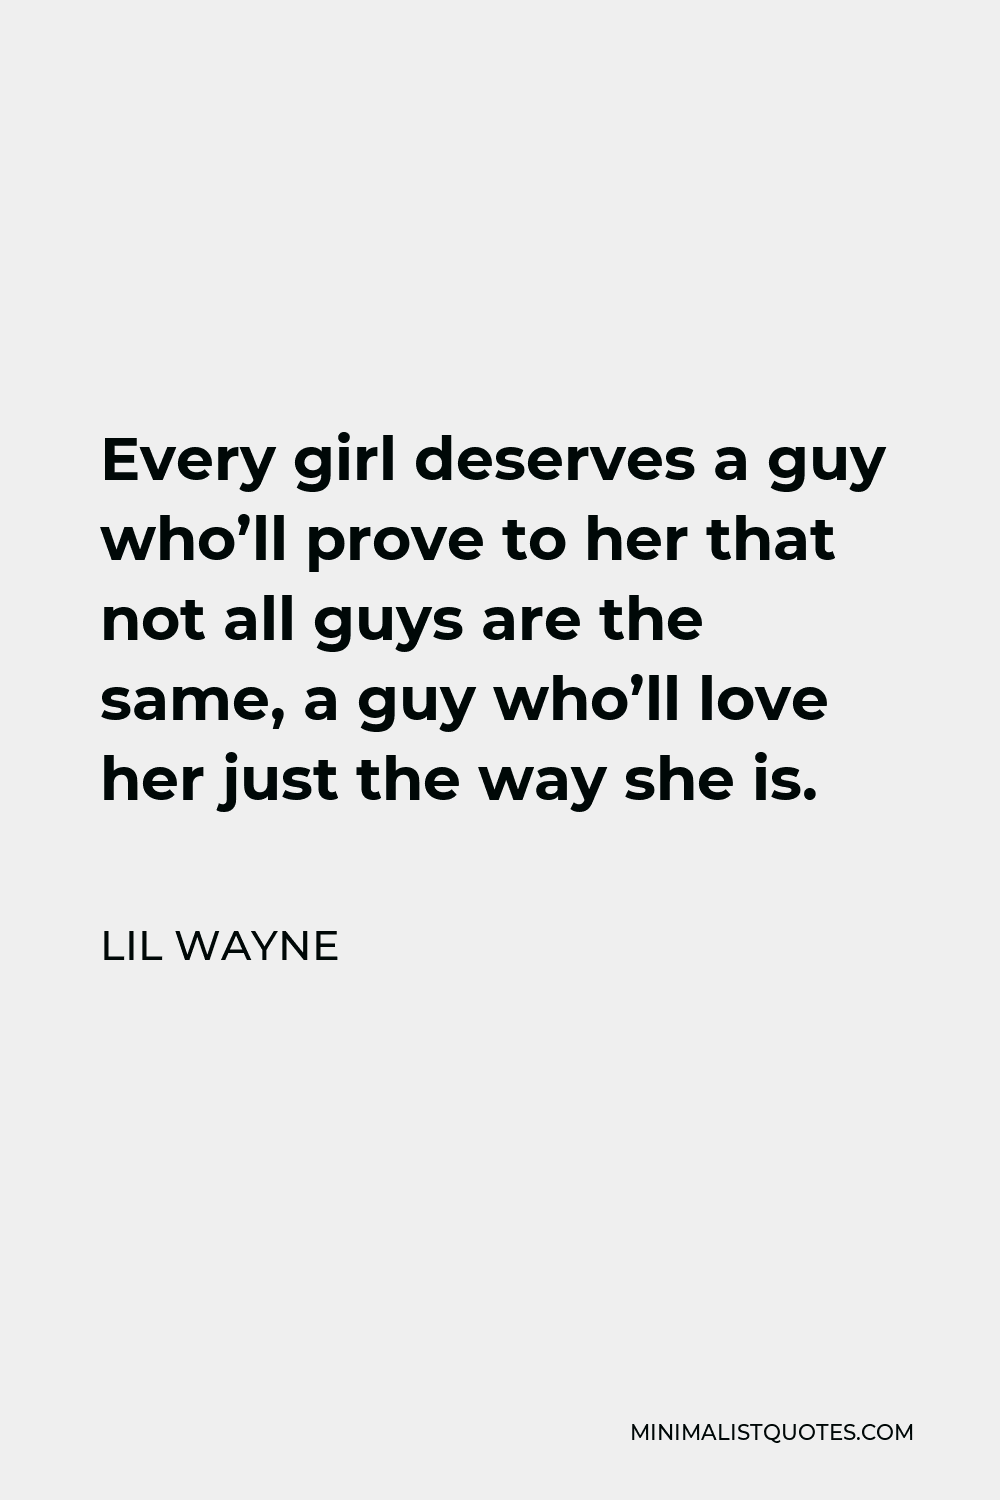 Lil Wayne Quote - Every girl deserves a guy who’ll prove to her that not all guys are the same, a guy who’ll love her just the way she is.